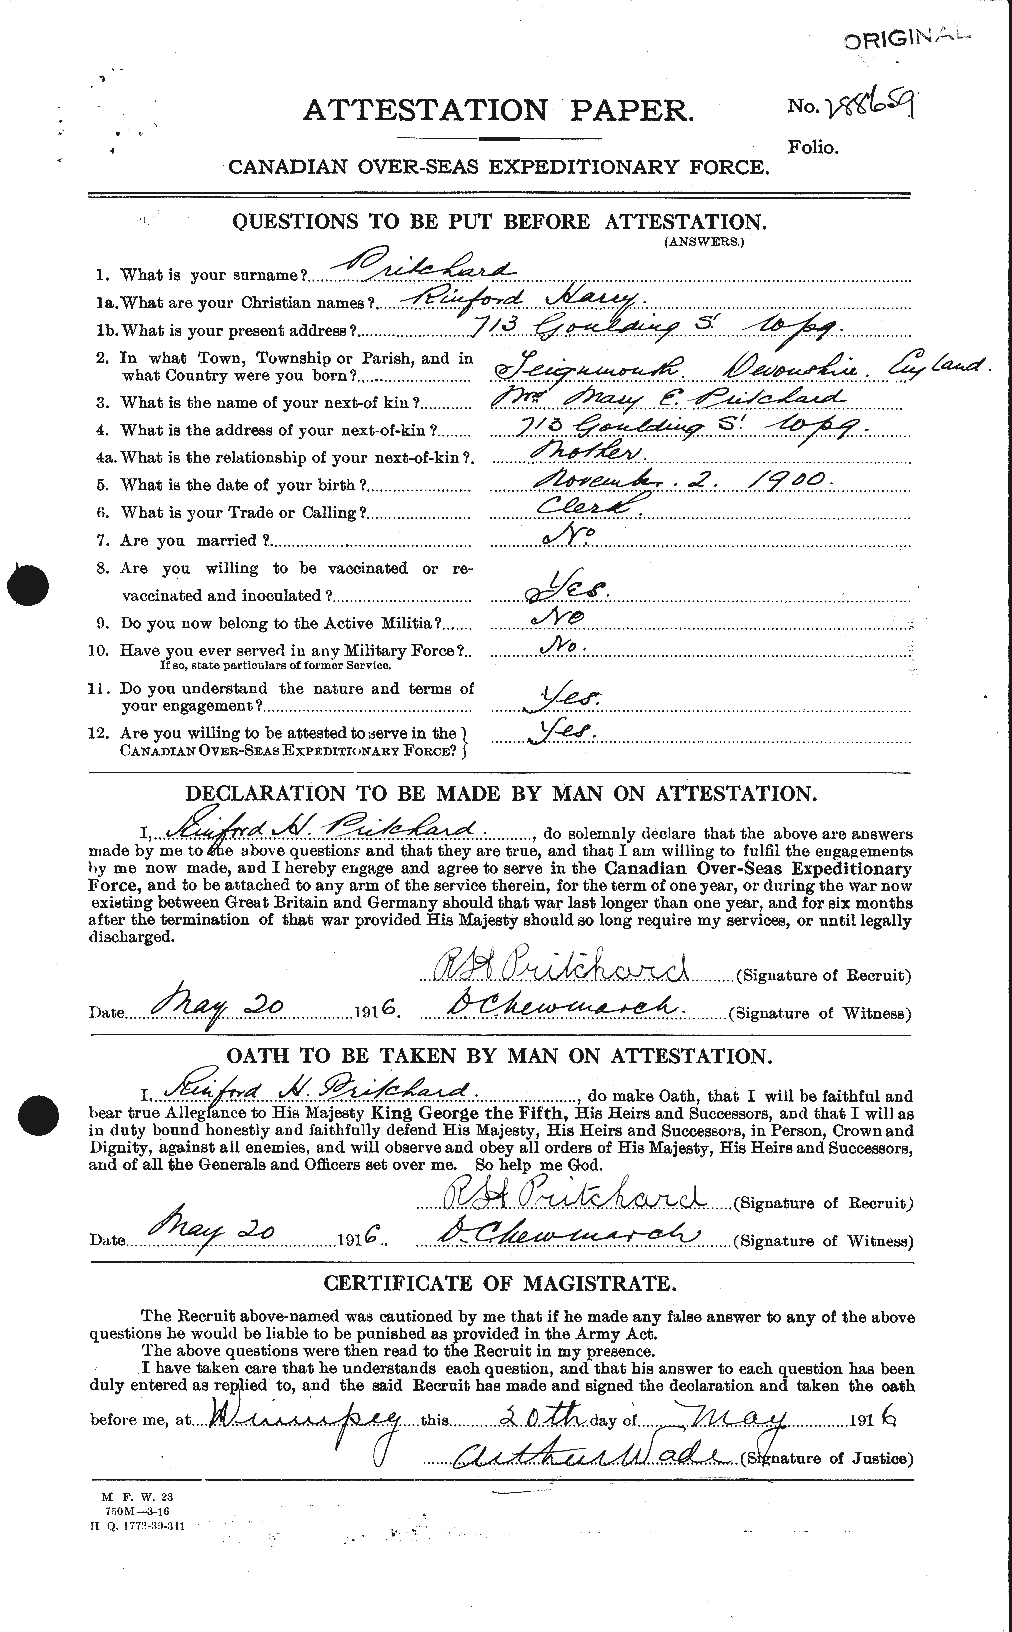 Personnel Records of the First World War - CEF 588597a